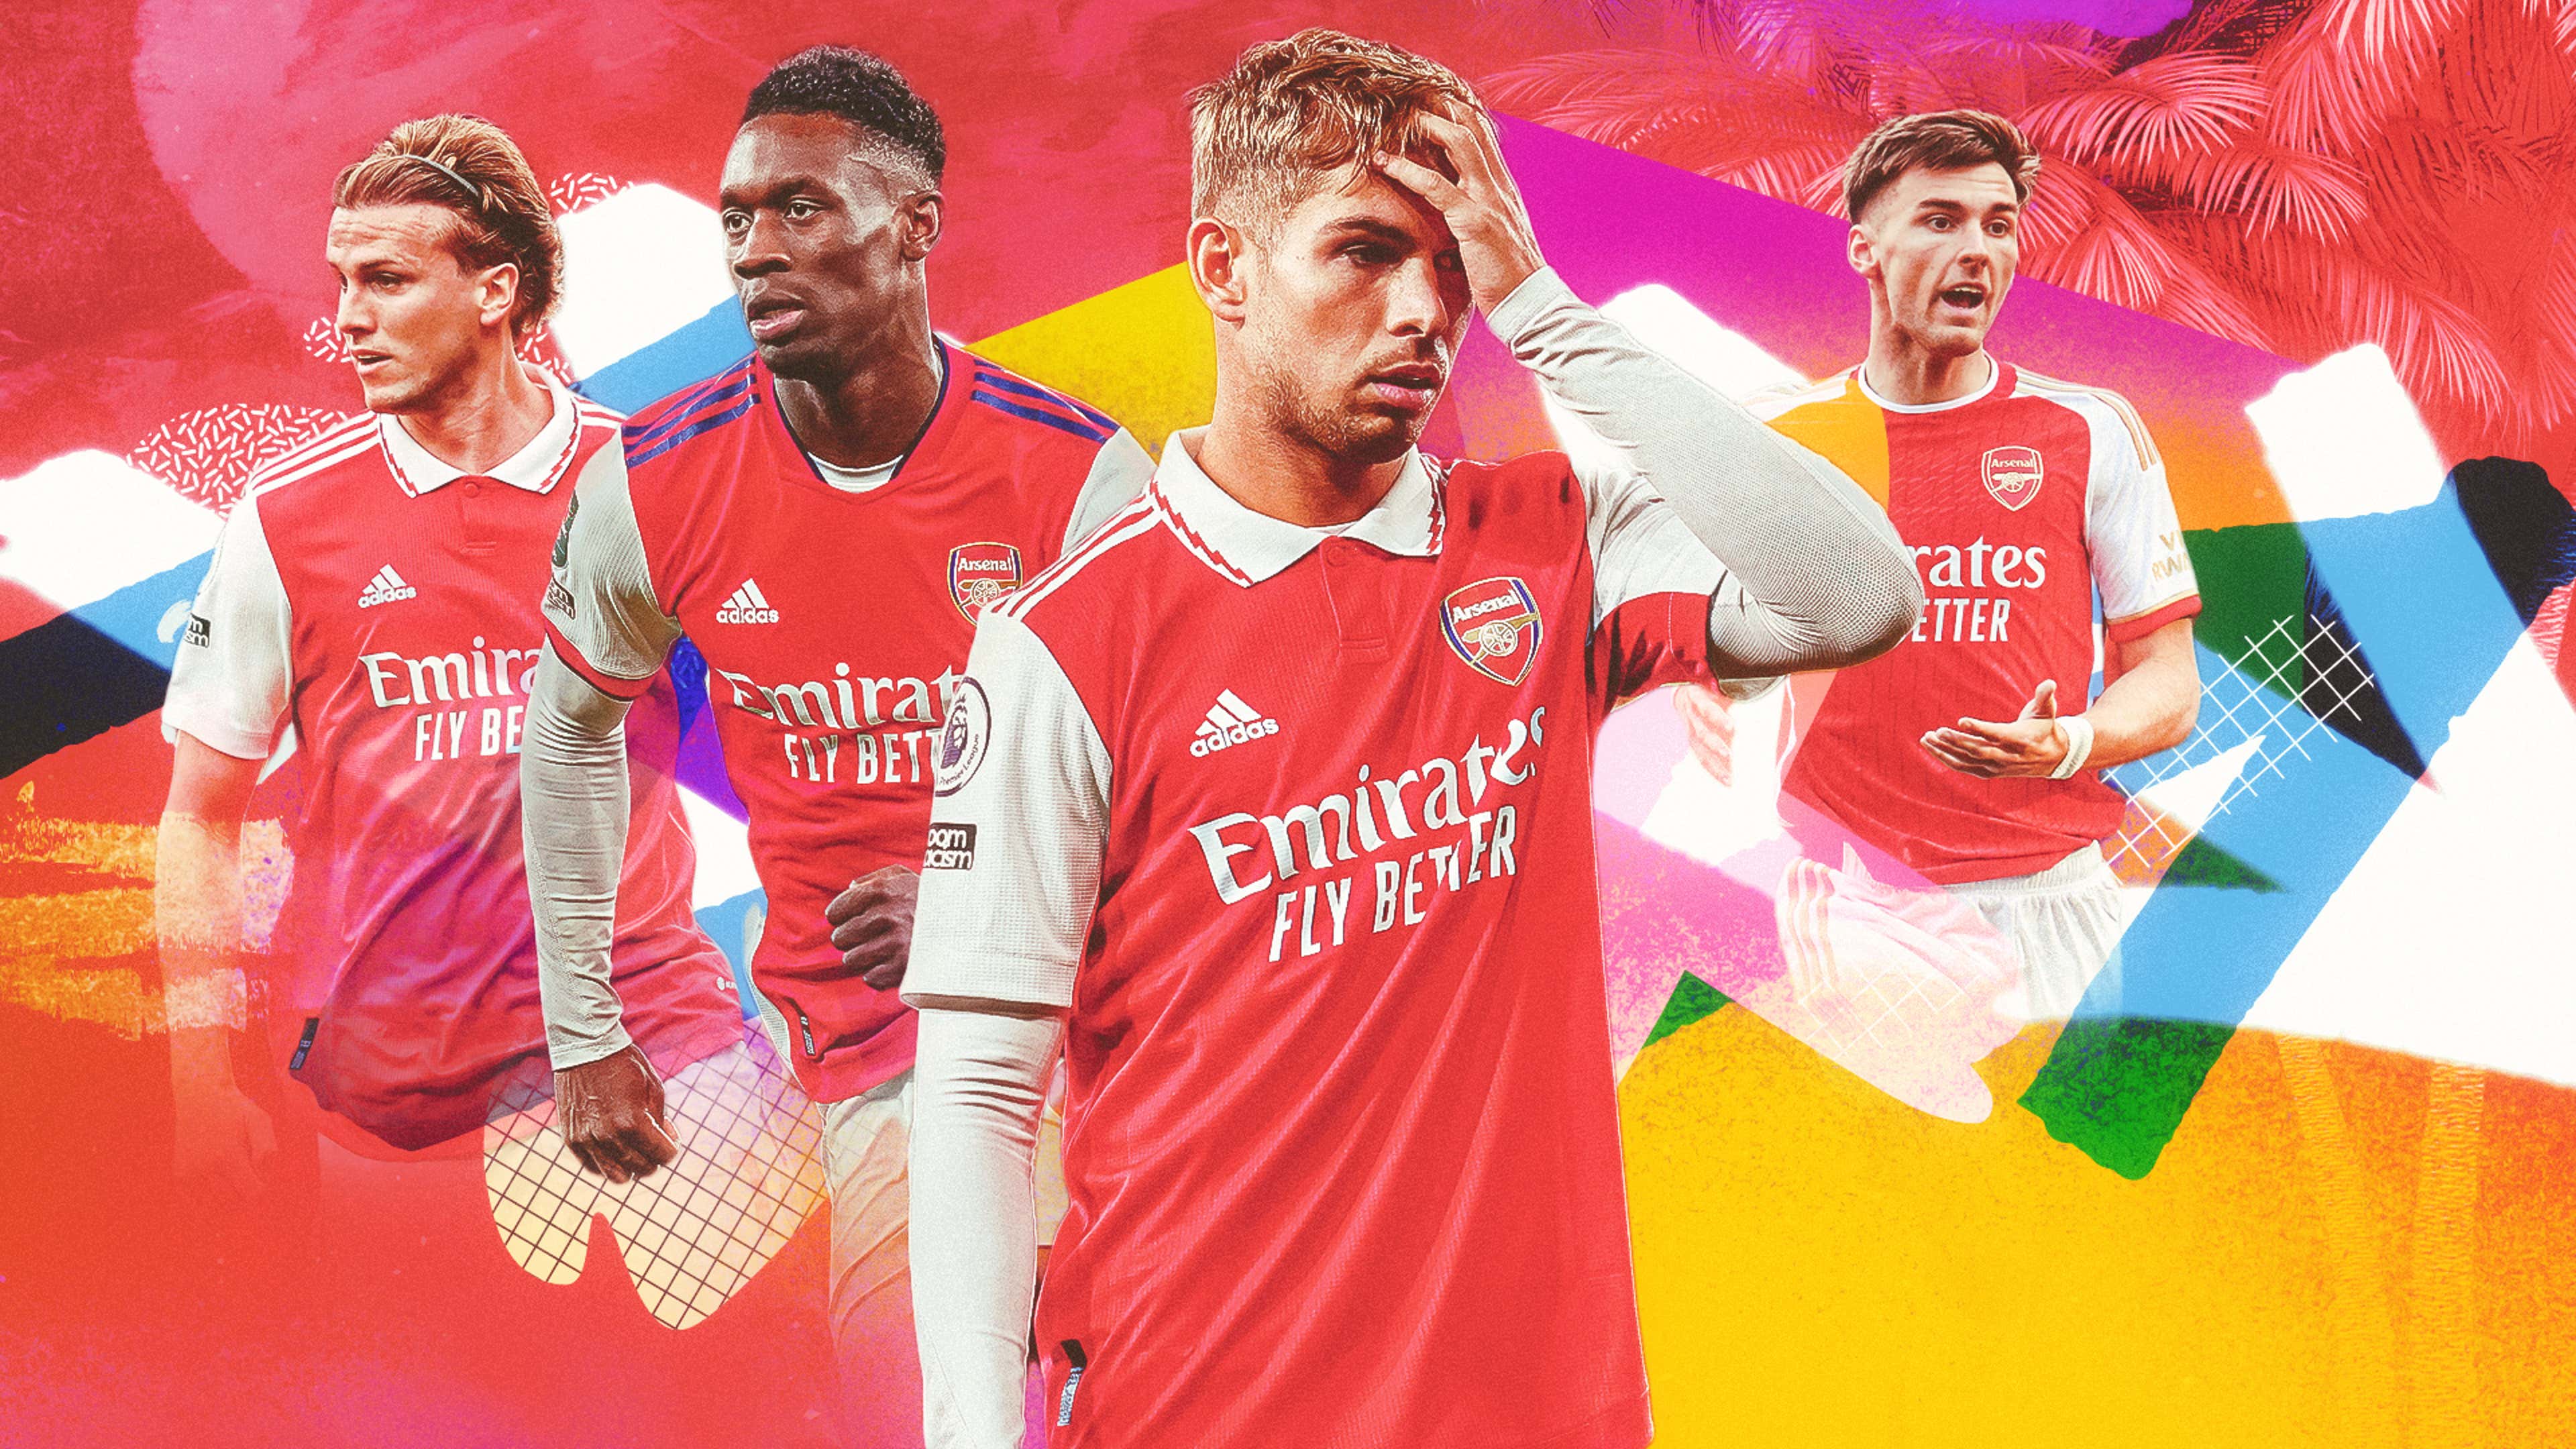 Analysis of the full Arsenal squad - Keep, Sell or Loan? - Just